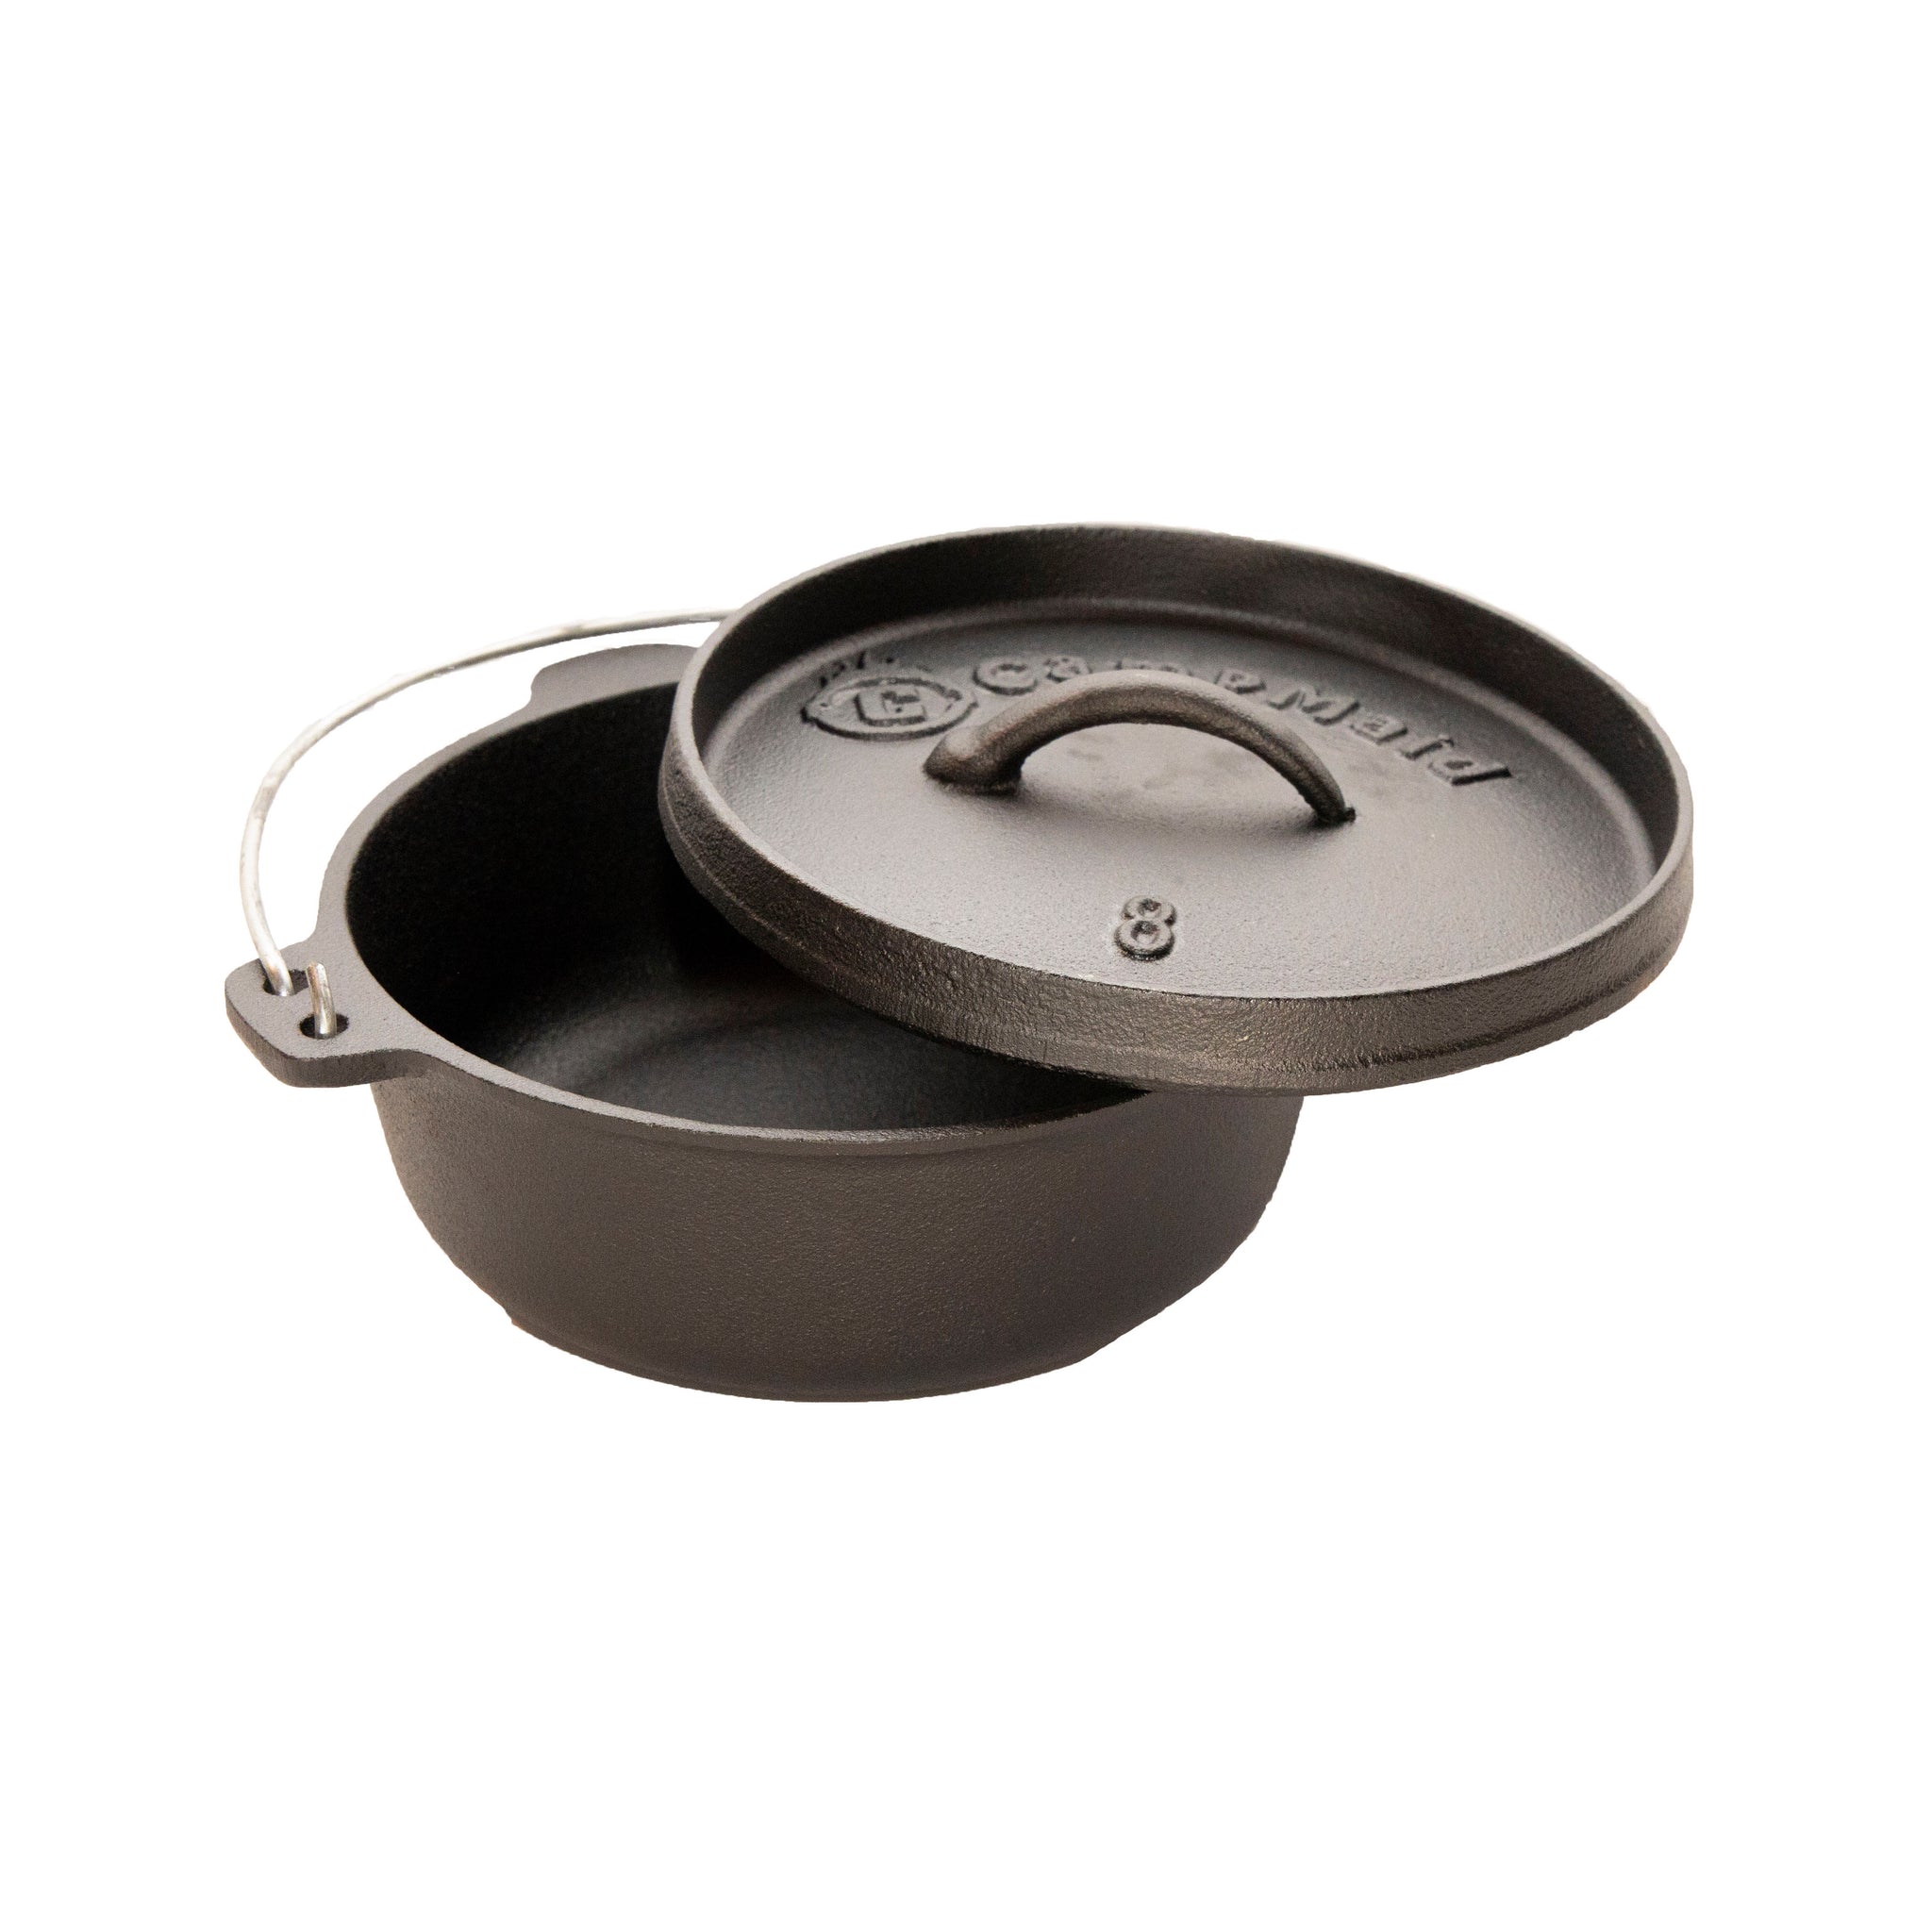 8 Pre-Seasoned 2 Quart Dutch Oven Without Legs - CampMaid